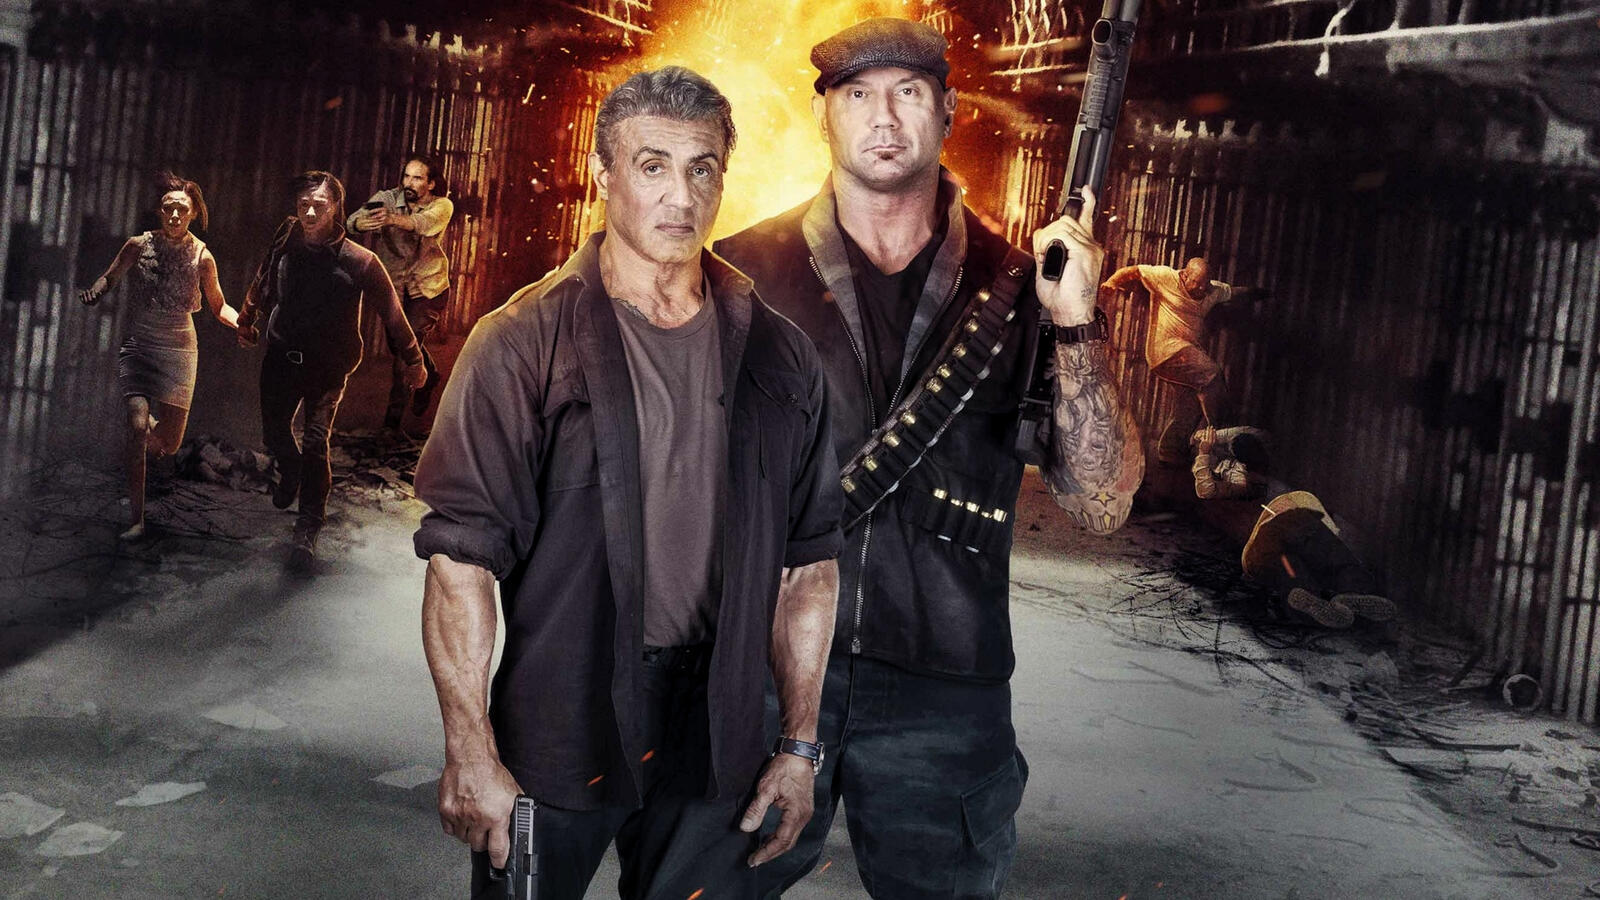 Wallpapers movies sylvestre stallone 2019 Movies on the desktop